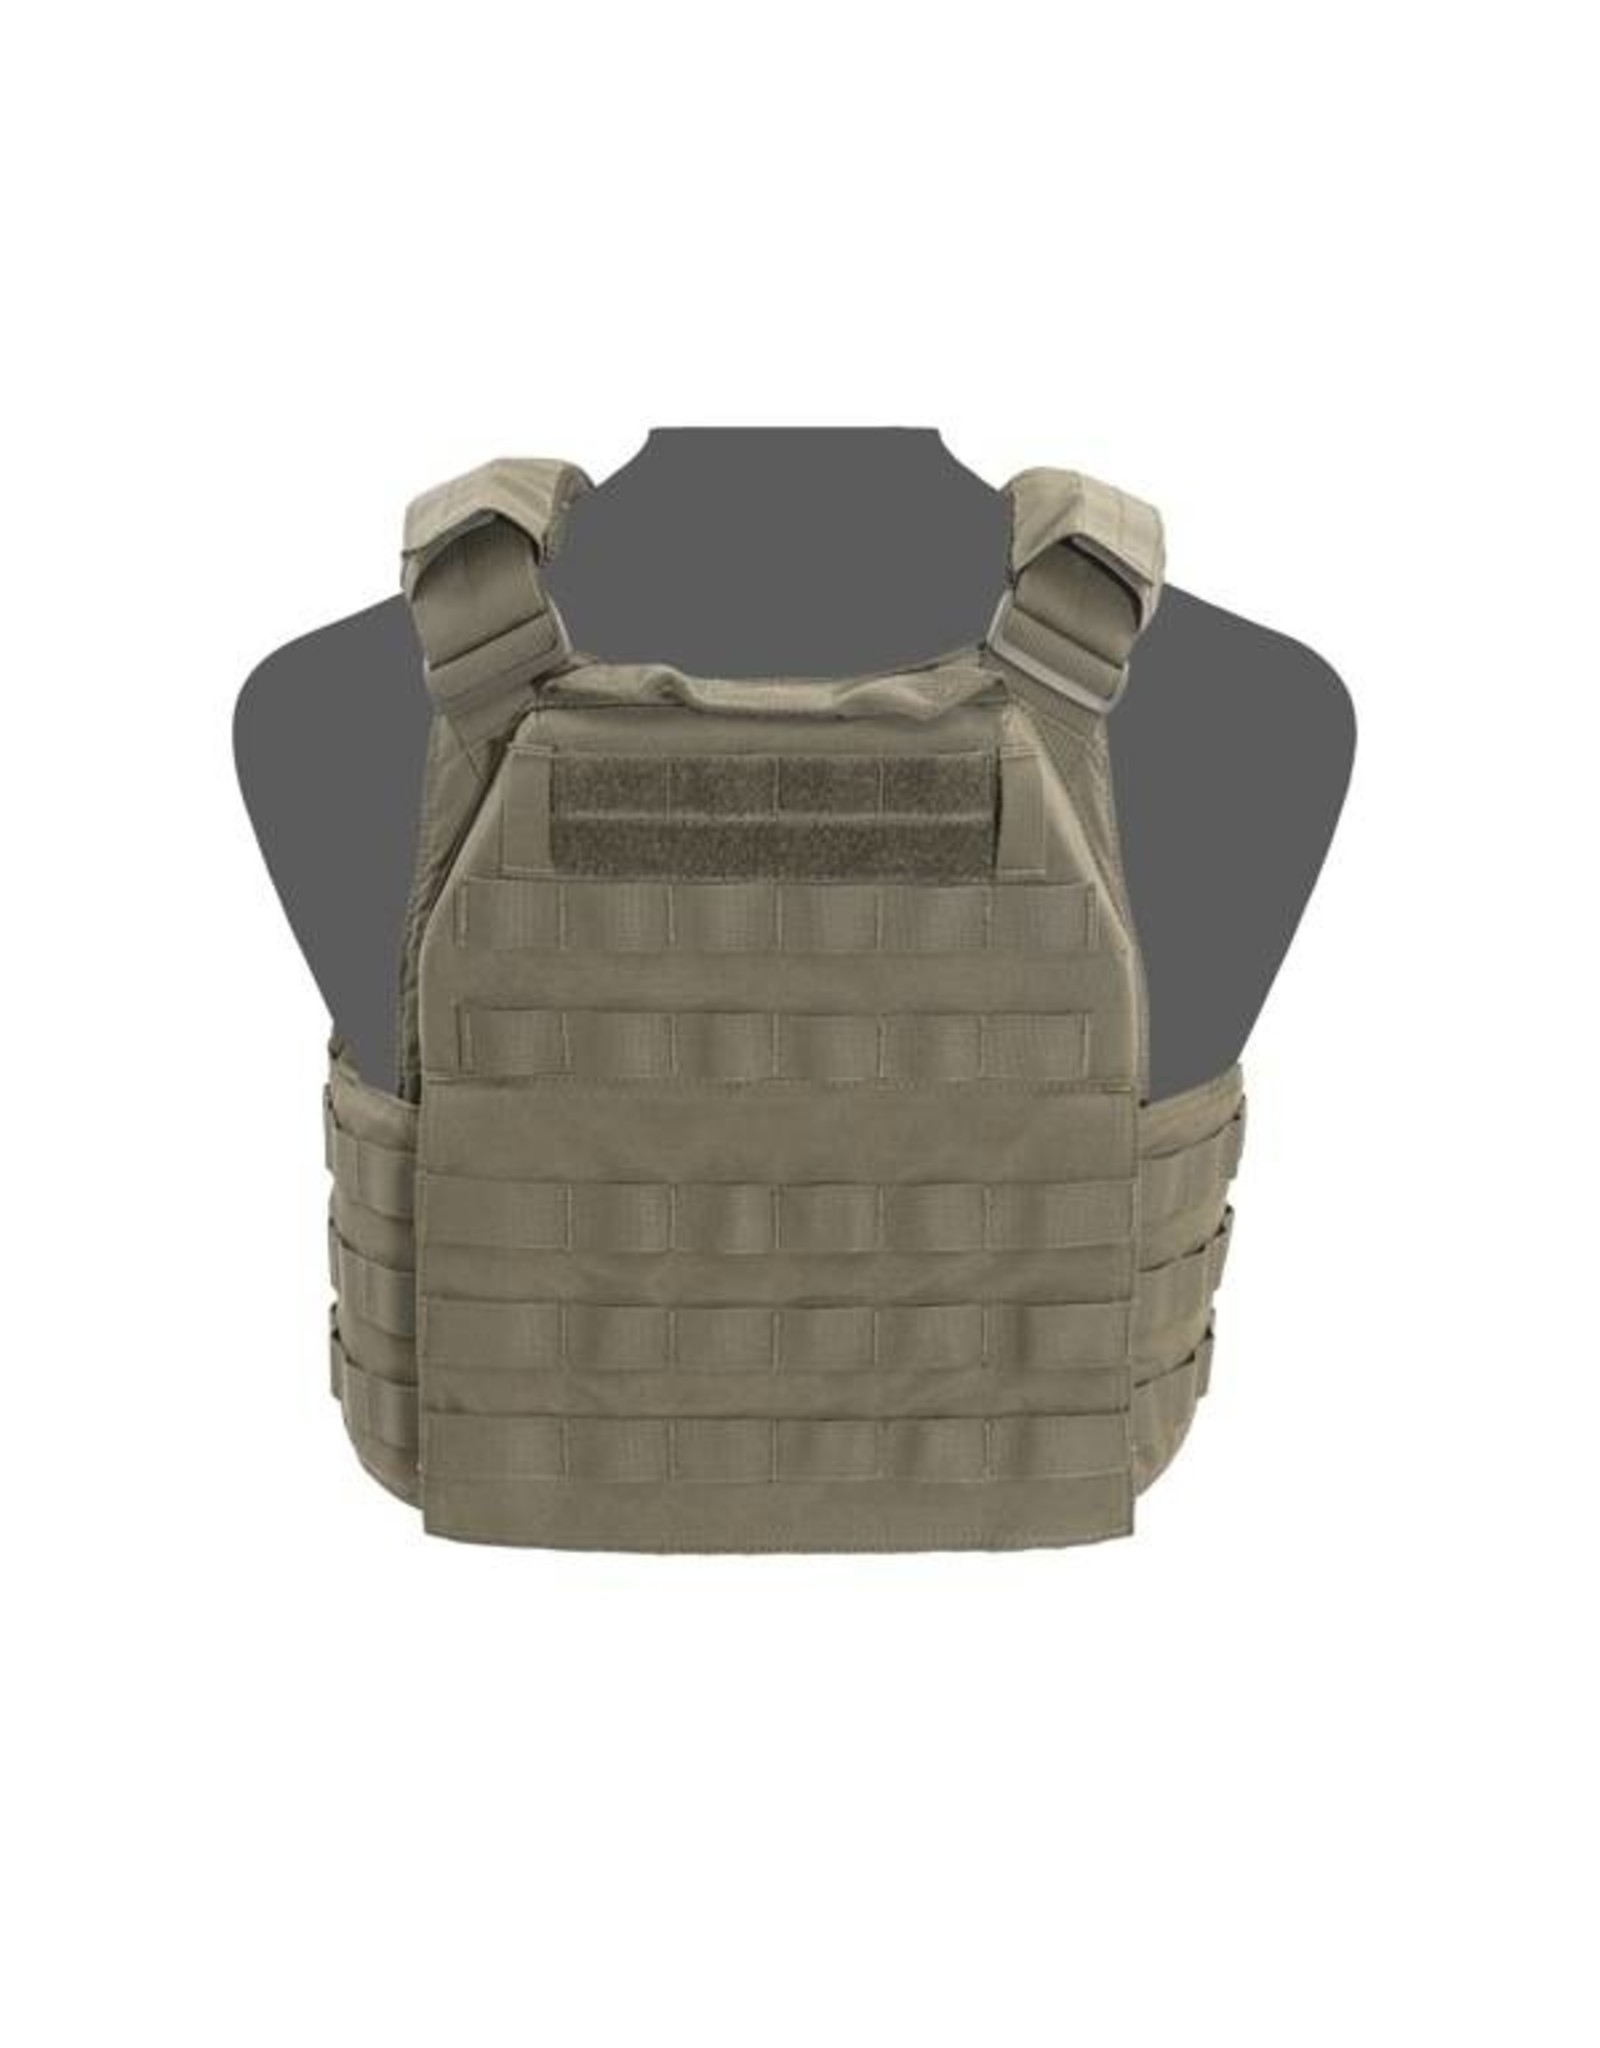 DCS Special Forces Plate Carrier Base - Ranger Green